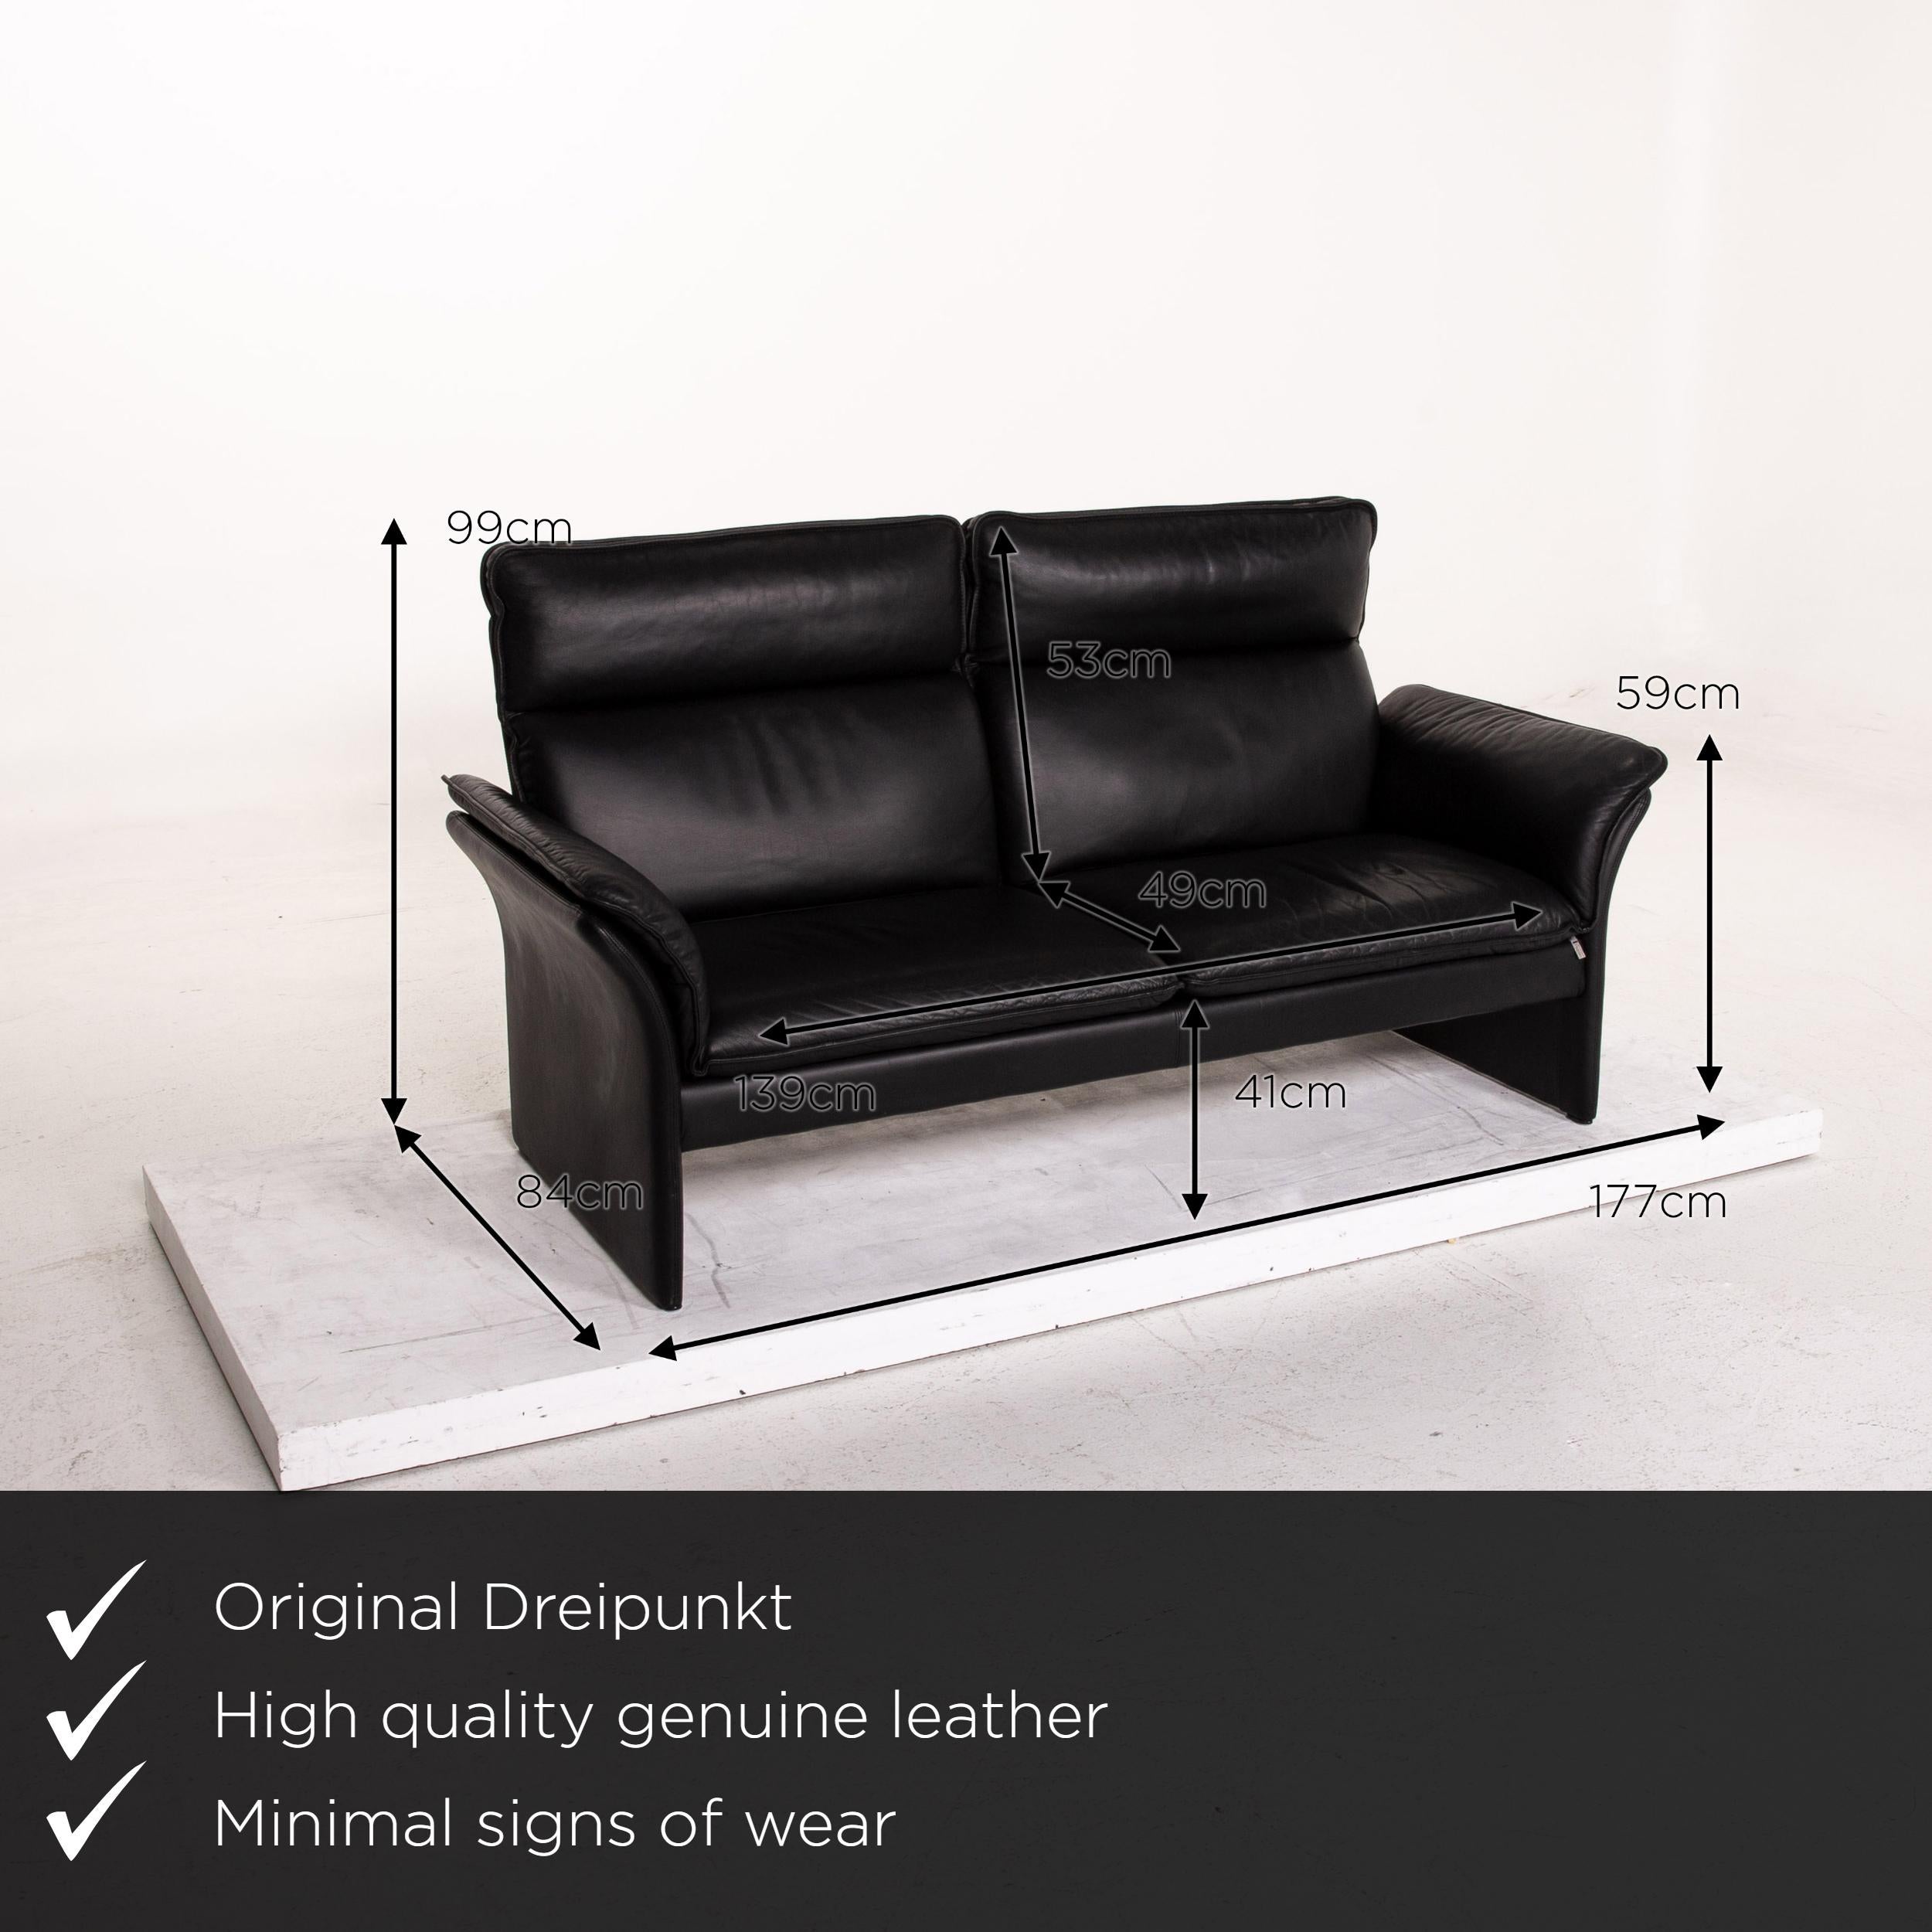 We present to you a three-point Scala leather sofa set black 1 three-seat 1 two-seat.


 Product measurements in centimeters:
 

Depth 84
Width 177
Height 99
Seat height 41
Rest height 59
Seat depth 49
Seat width 139
Back height 53.
  